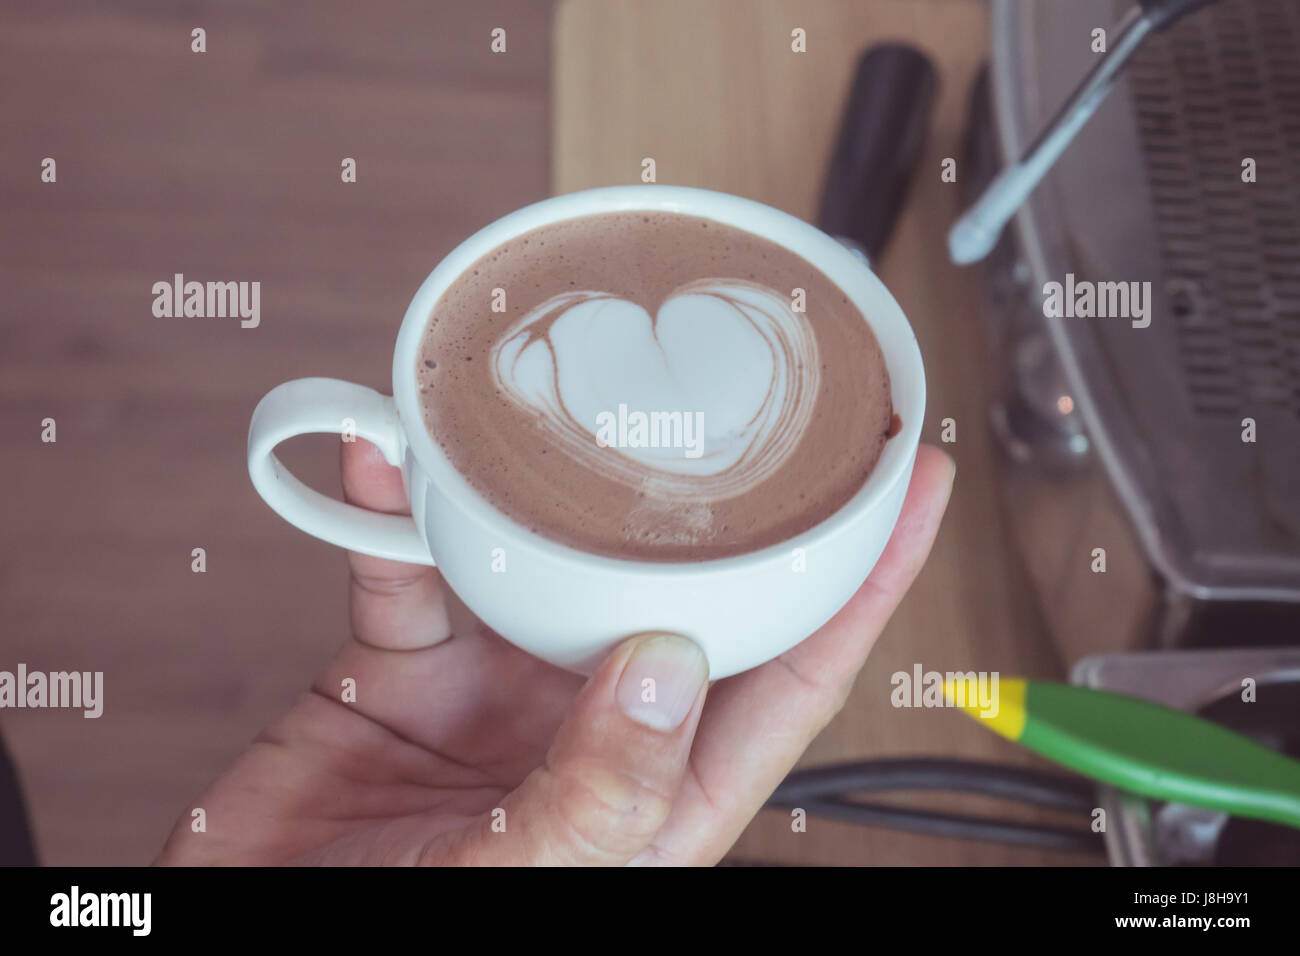 How To Make A Heart Shaped Latte Art Coffee In Various Forms Stock Photo Alamy,Eggplant Recipes Thai